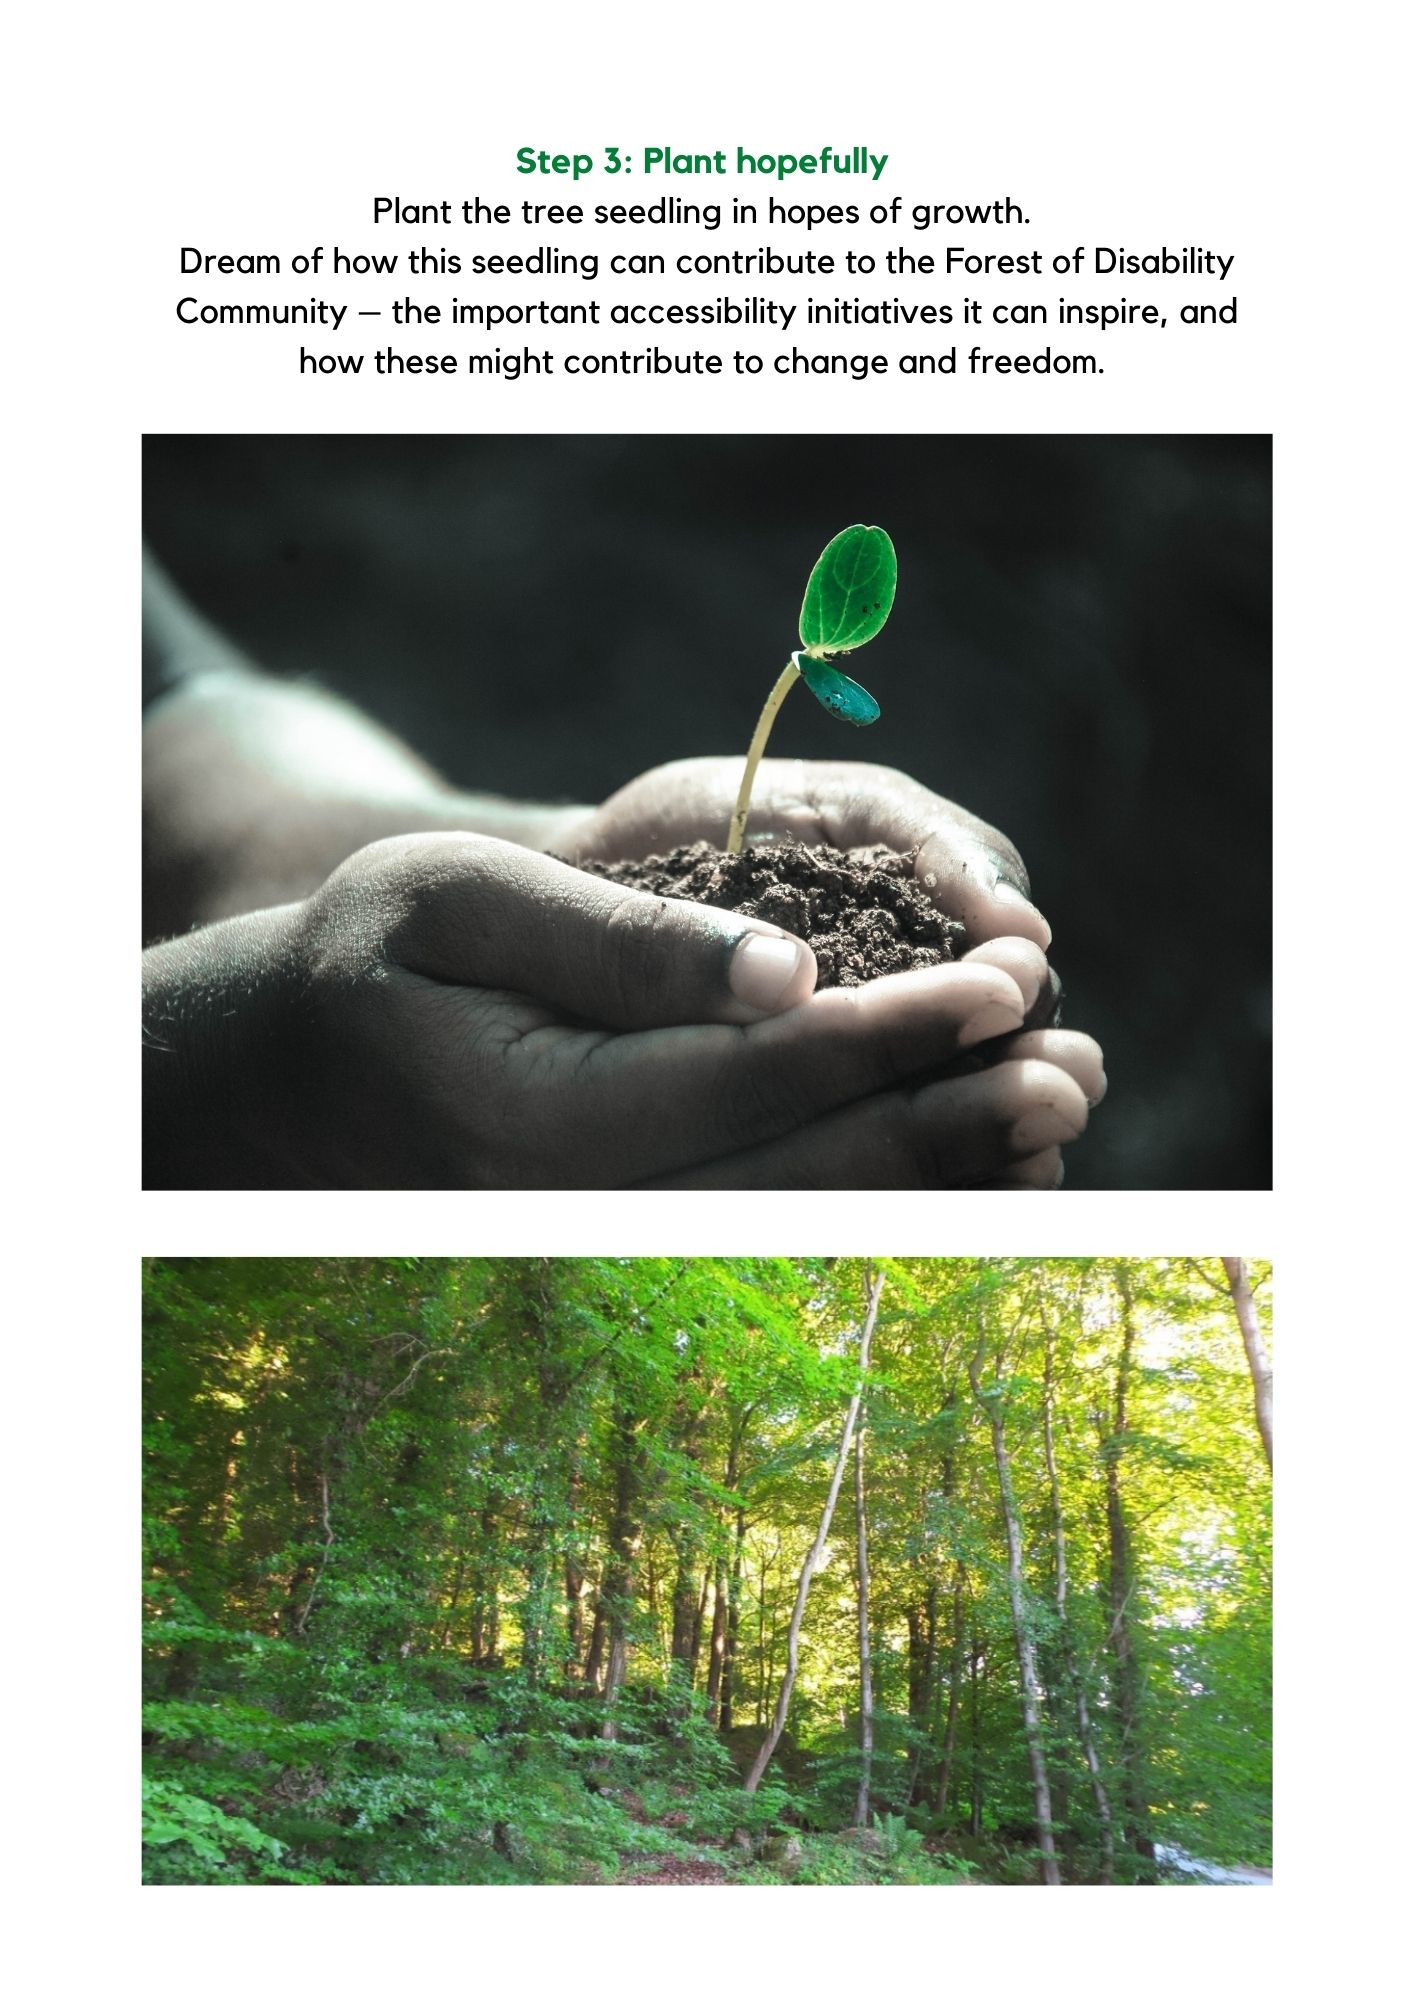 Image contains step three of growing accessibility. There are two photographs also displayed on this page. The first is a picture of someone holding a small plant contained in dirt. The second picture is of a forest with many young trees.